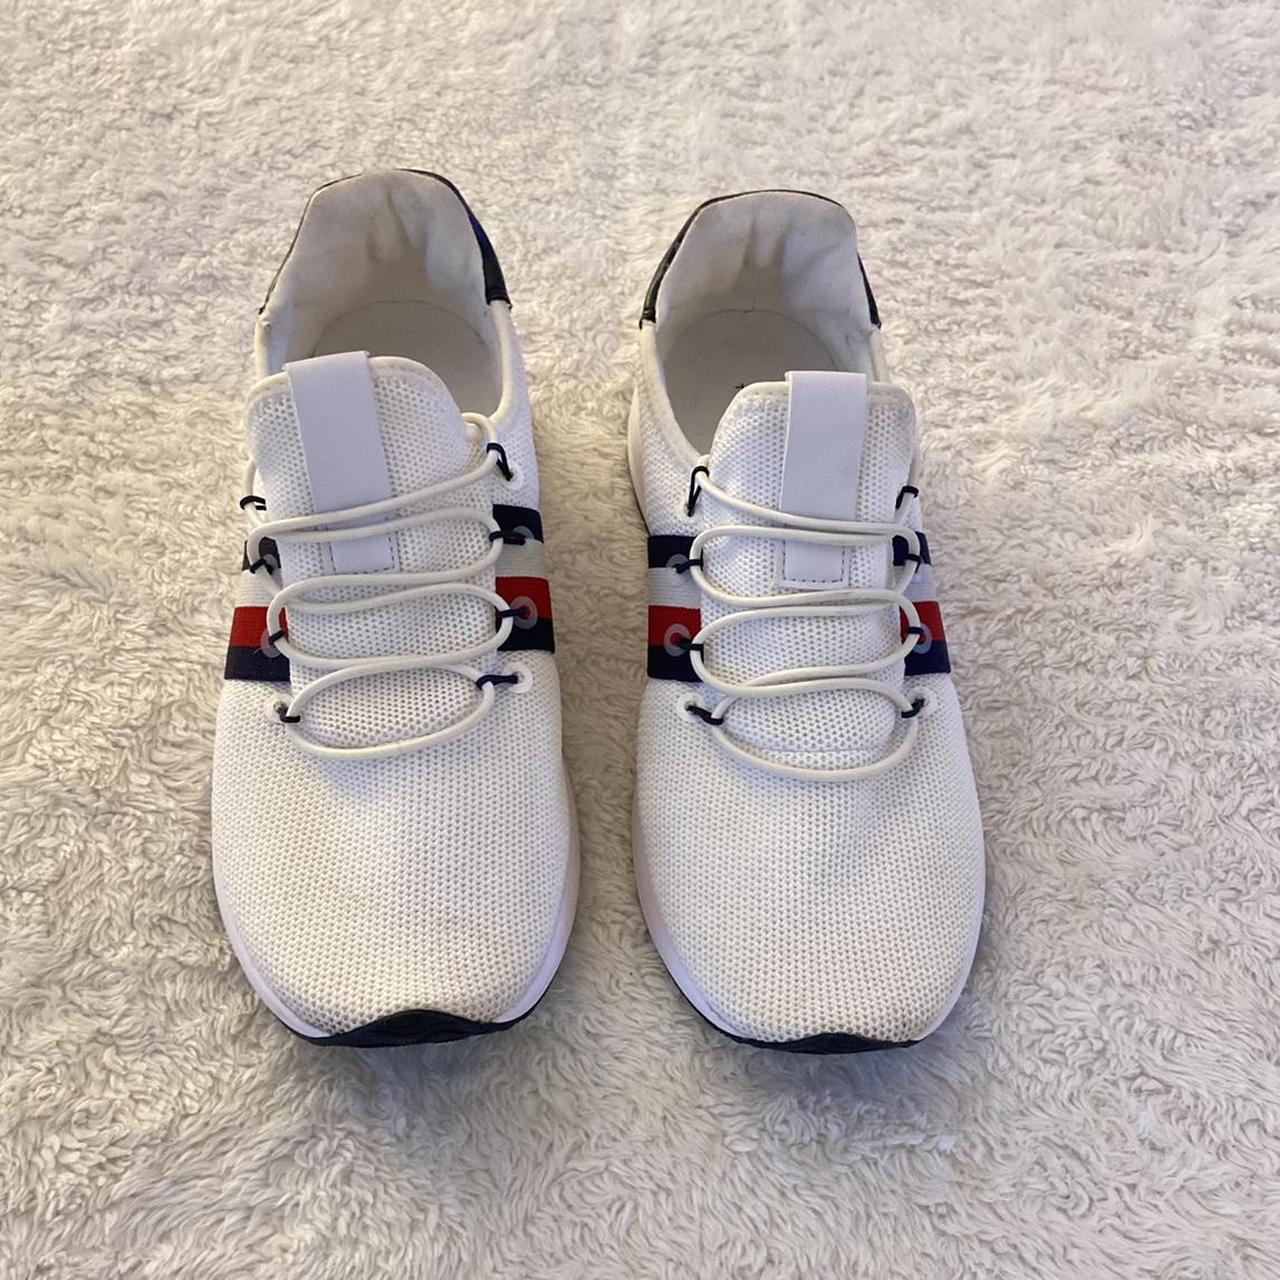 Product Image 4 - White Tommy Hilfiger Sneaker Shoes

Size